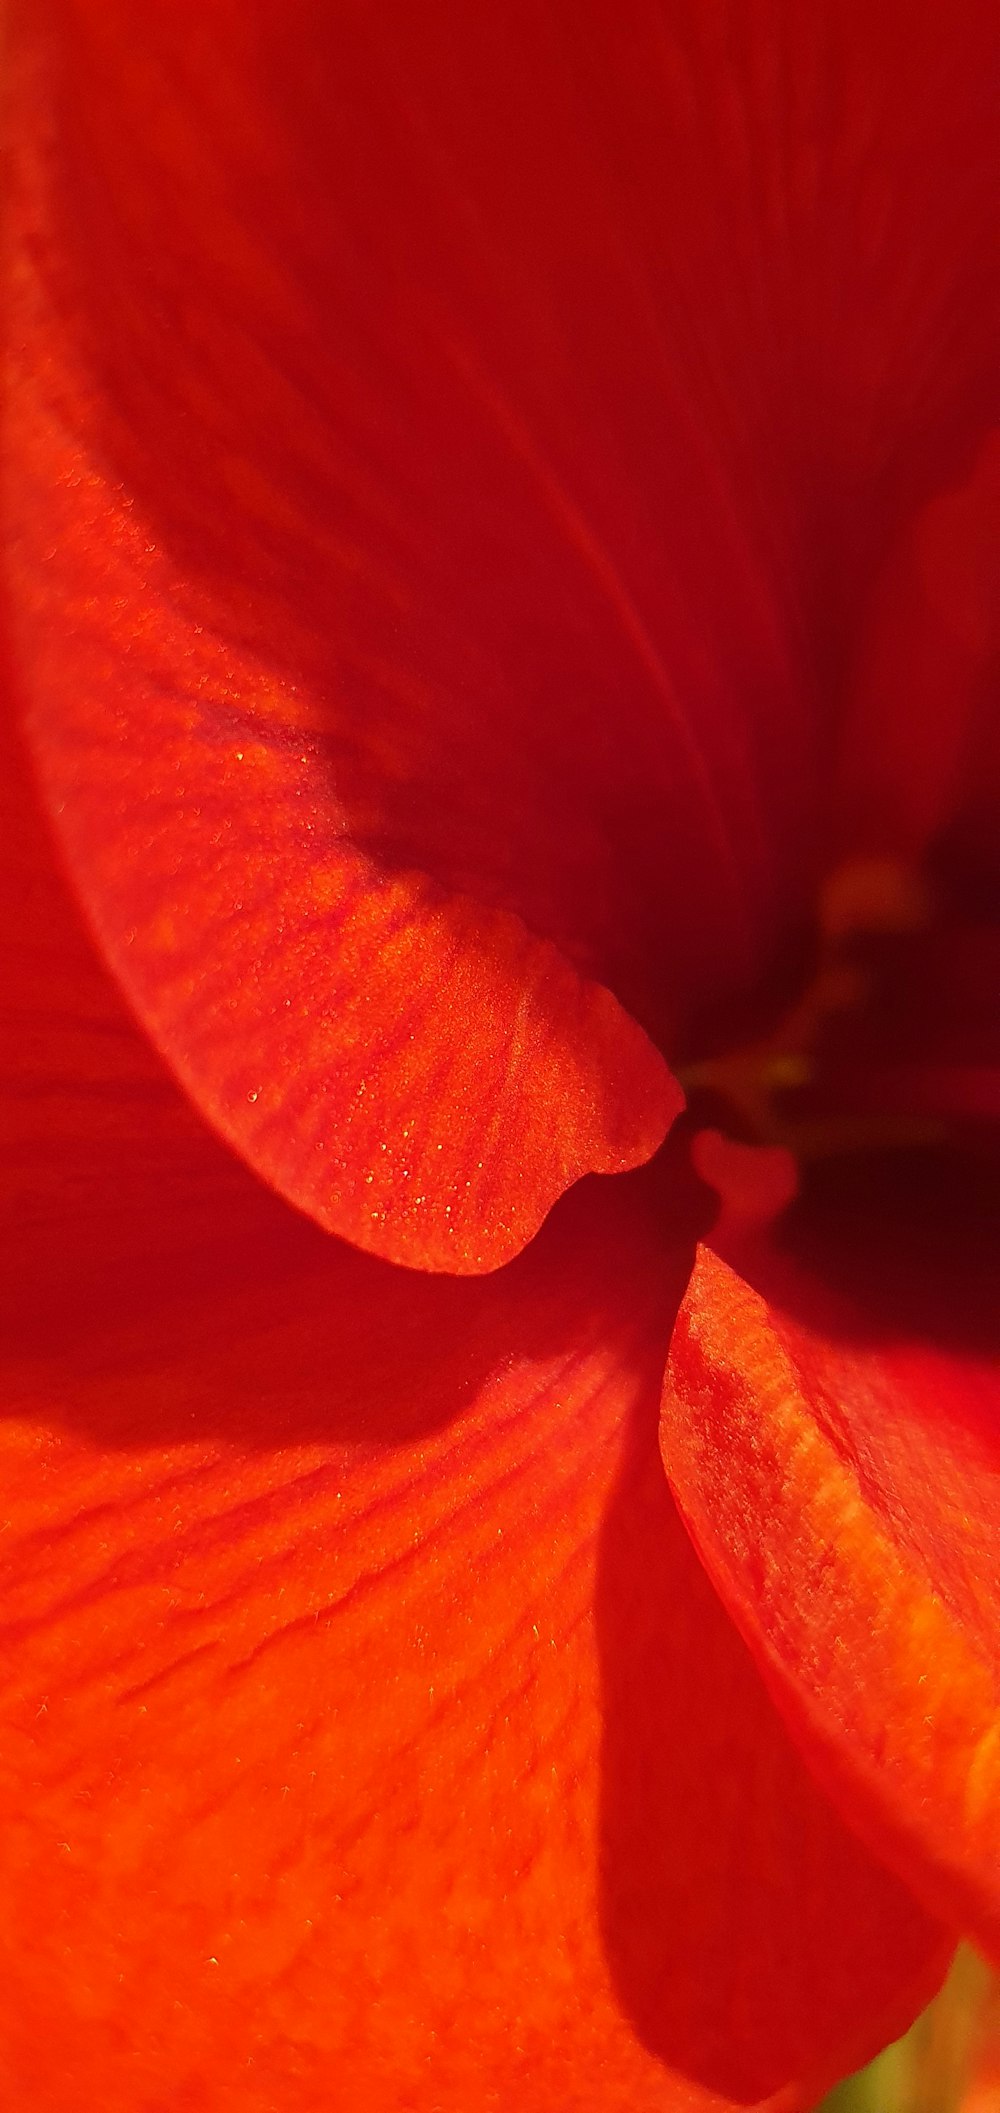 a close up of a bright red flower